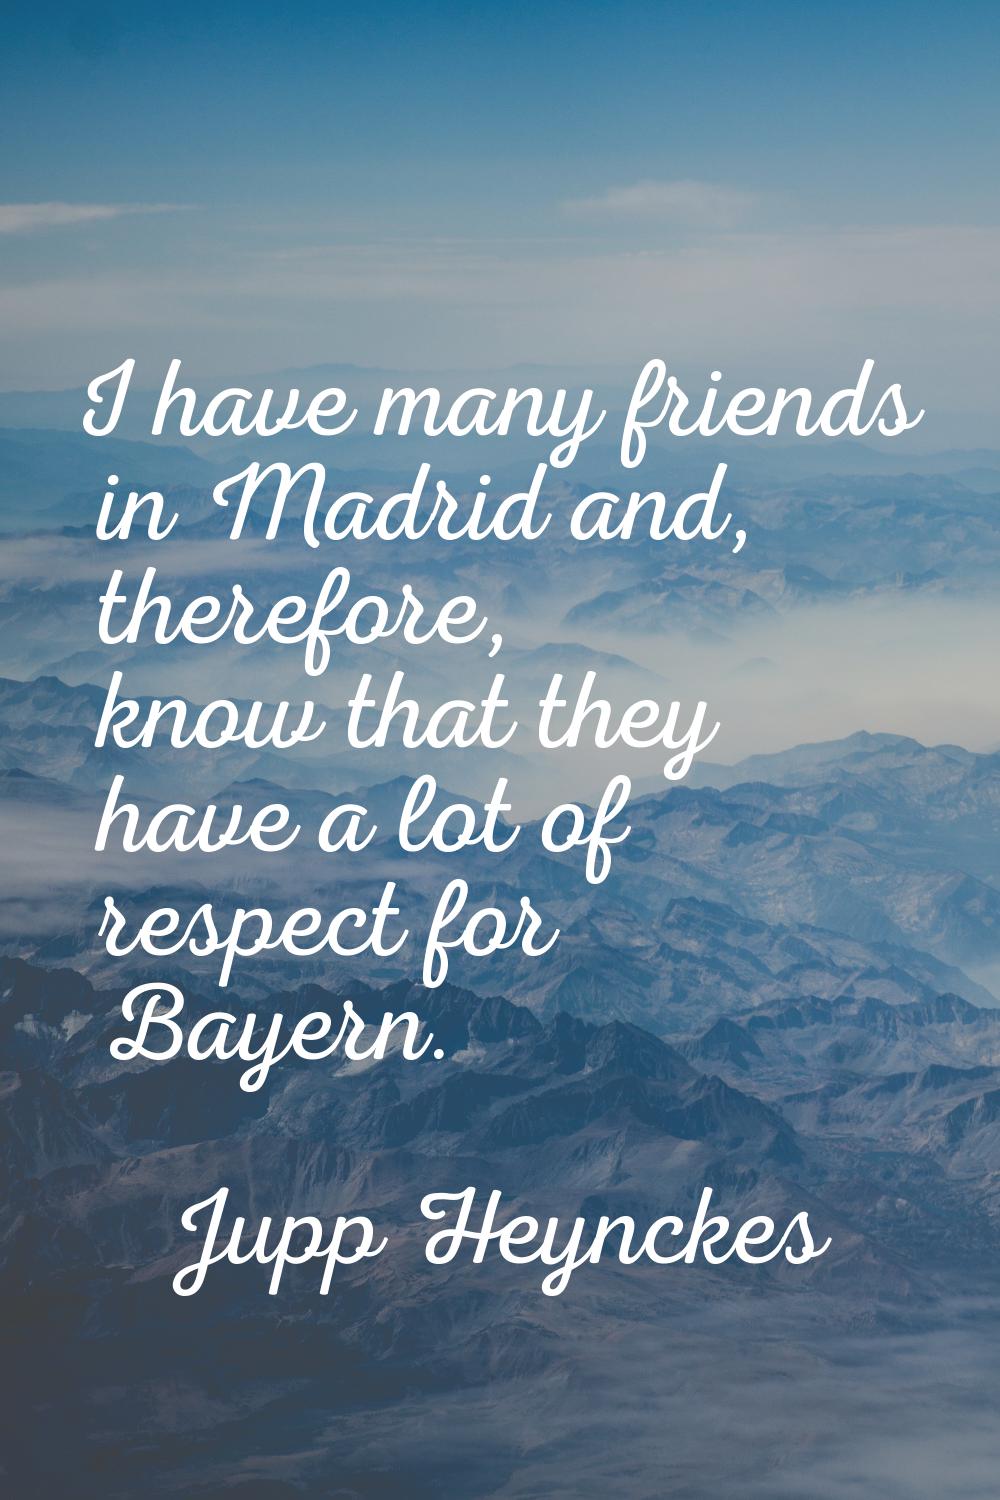 I have many friends in Madrid and, therefore, know that they have a lot of respect for Bayern.